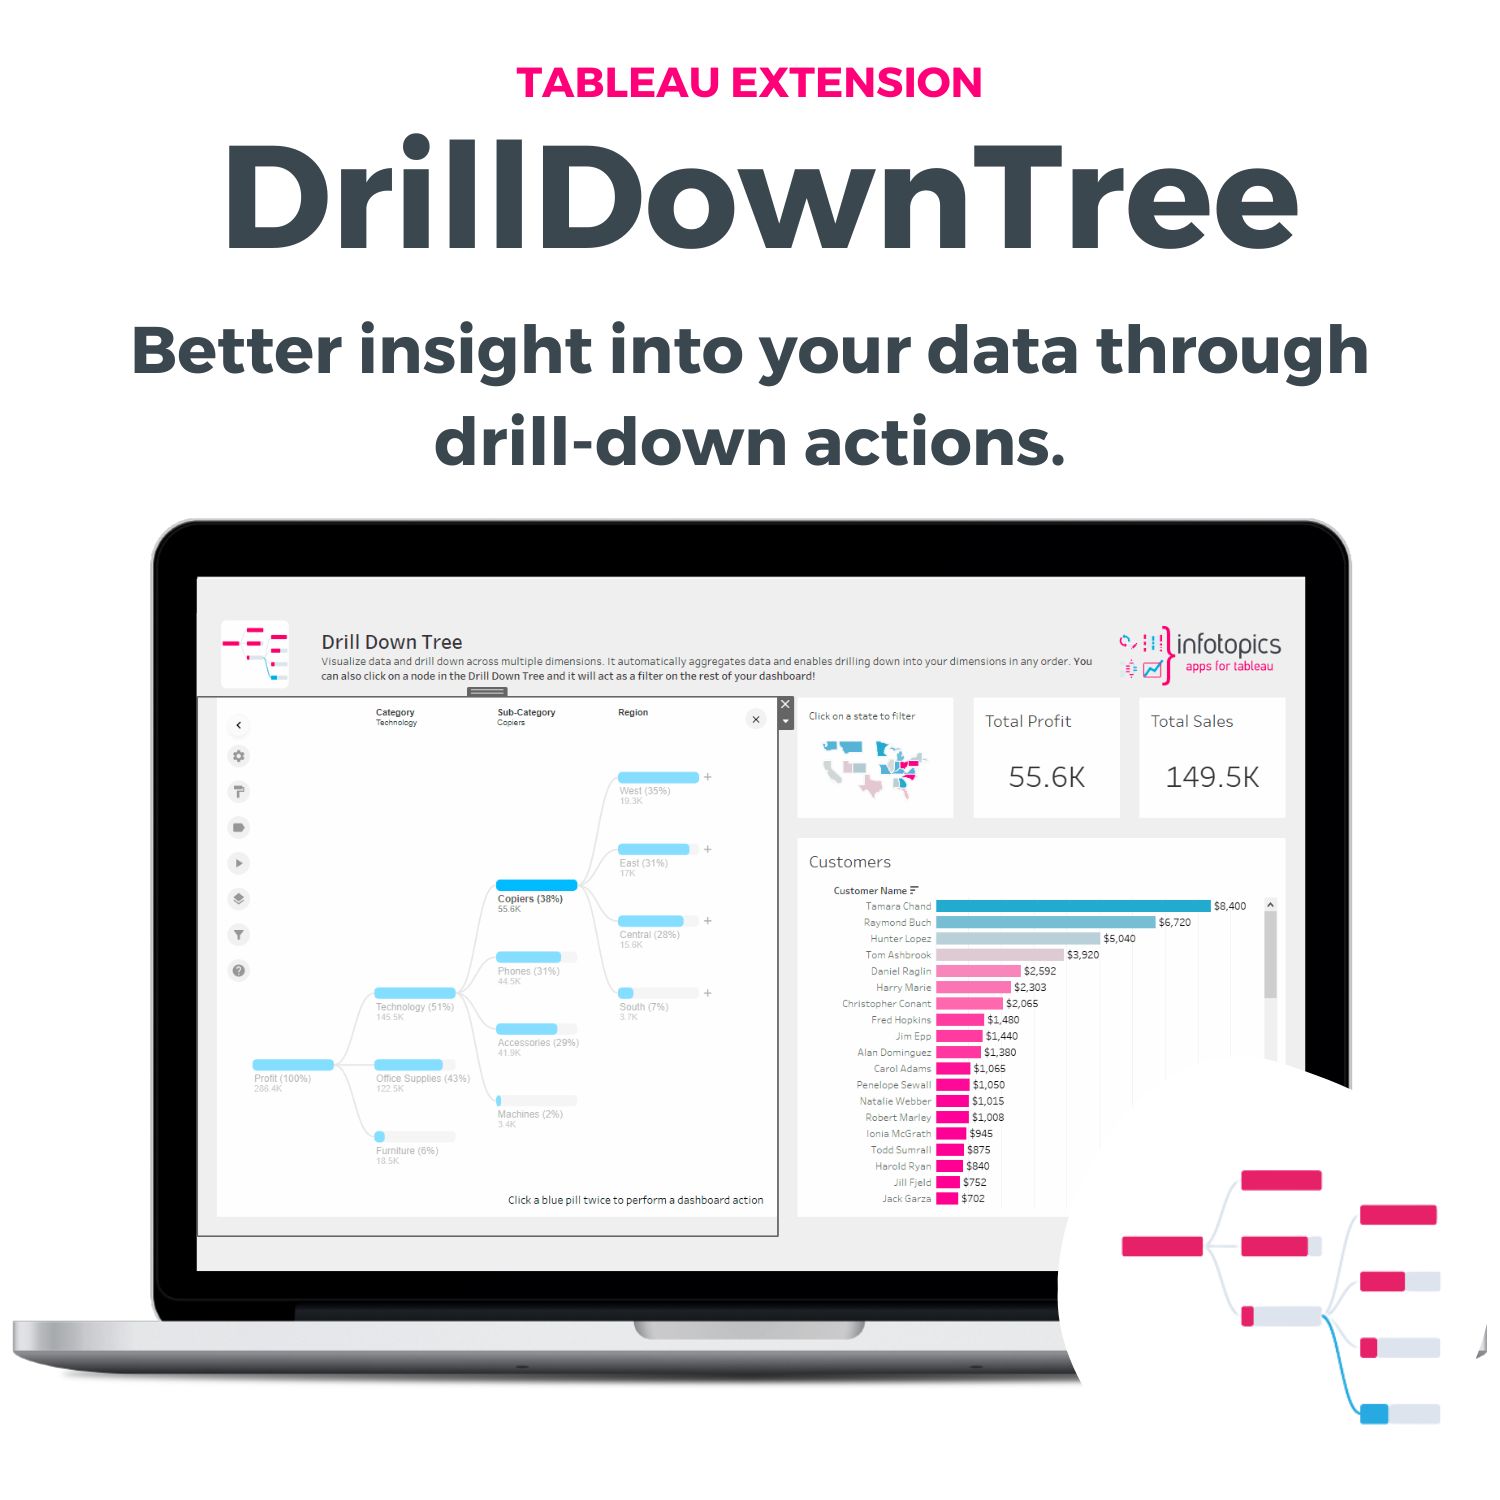 DrillDownTree - gain insight into your data through drill down actions